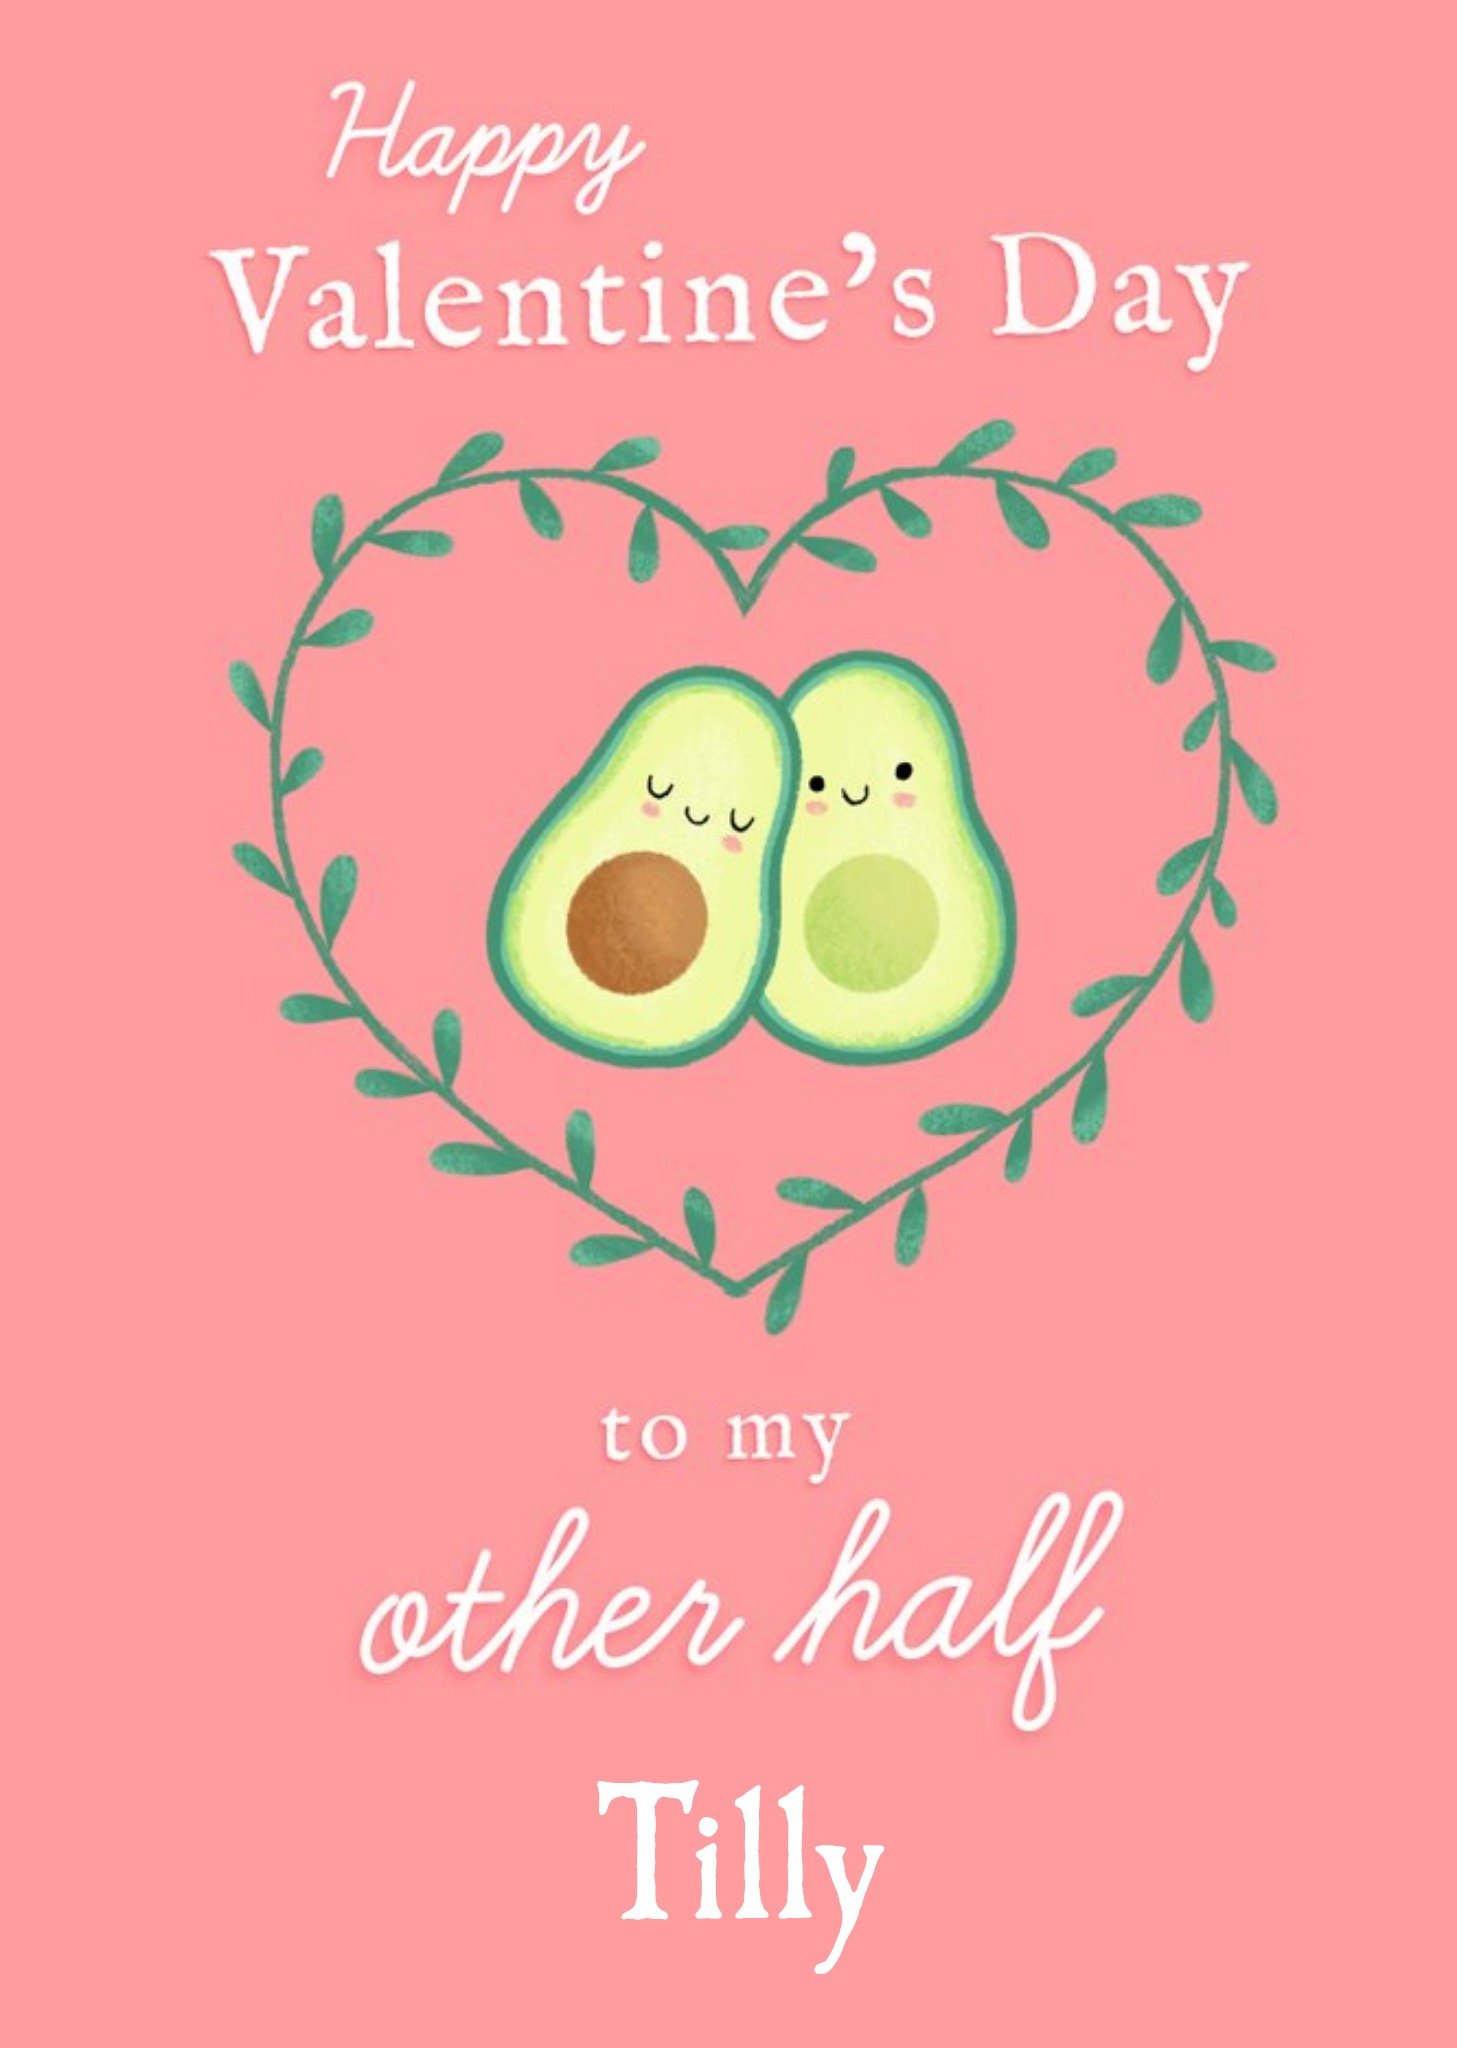 Moonpig Illustration Of Two Half's Of An Avocado On A Pink Background Valentine's Day Card, Large